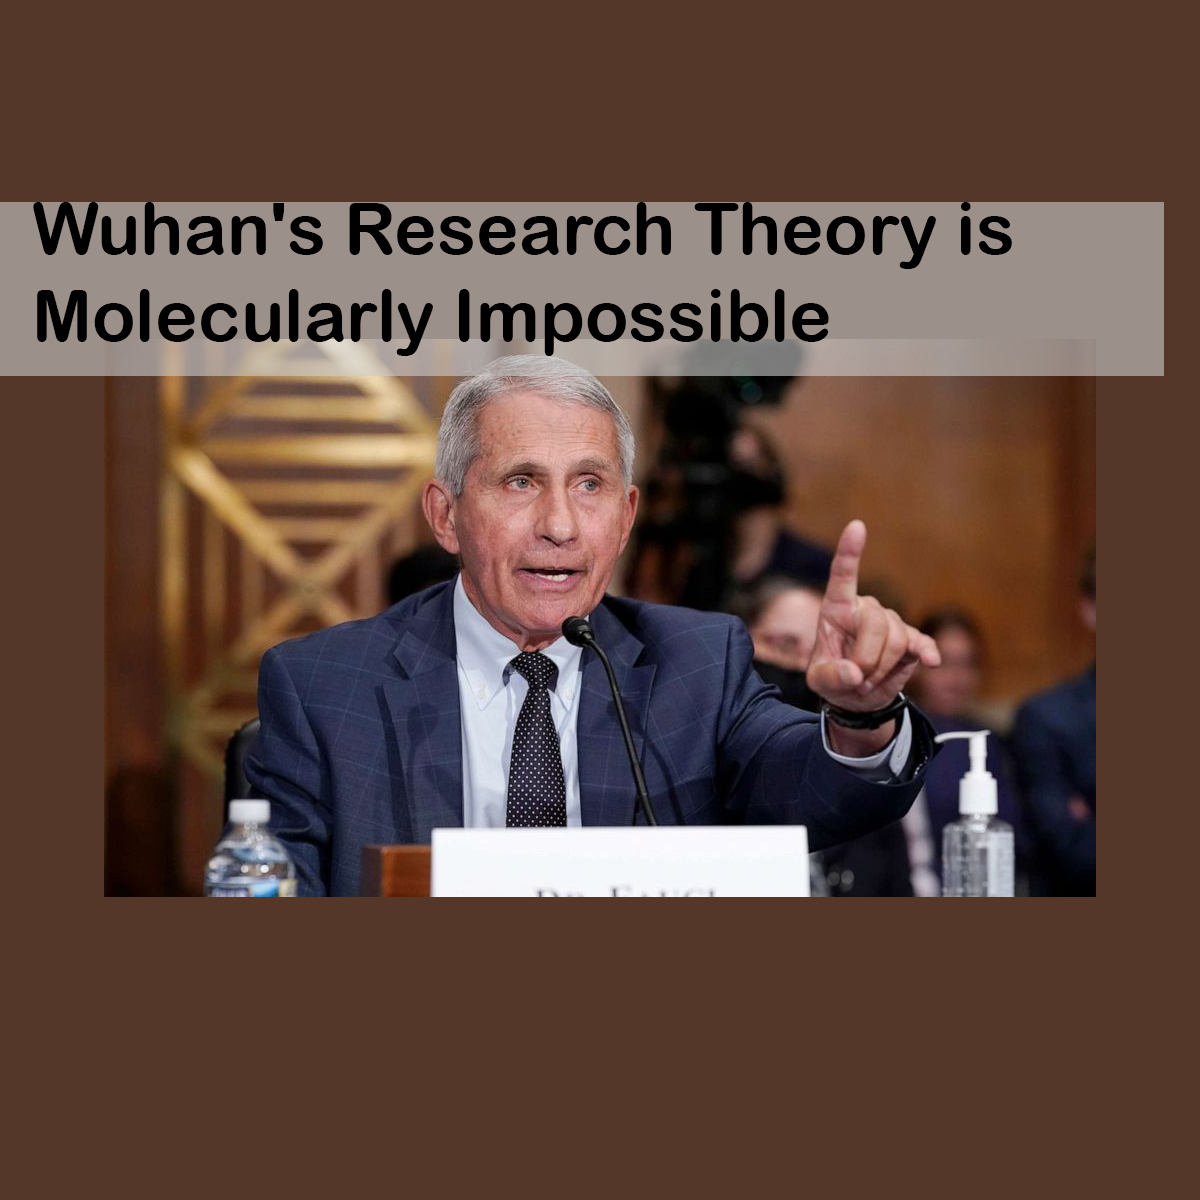 Wuhan's Research Theory is Molecularly Impossible